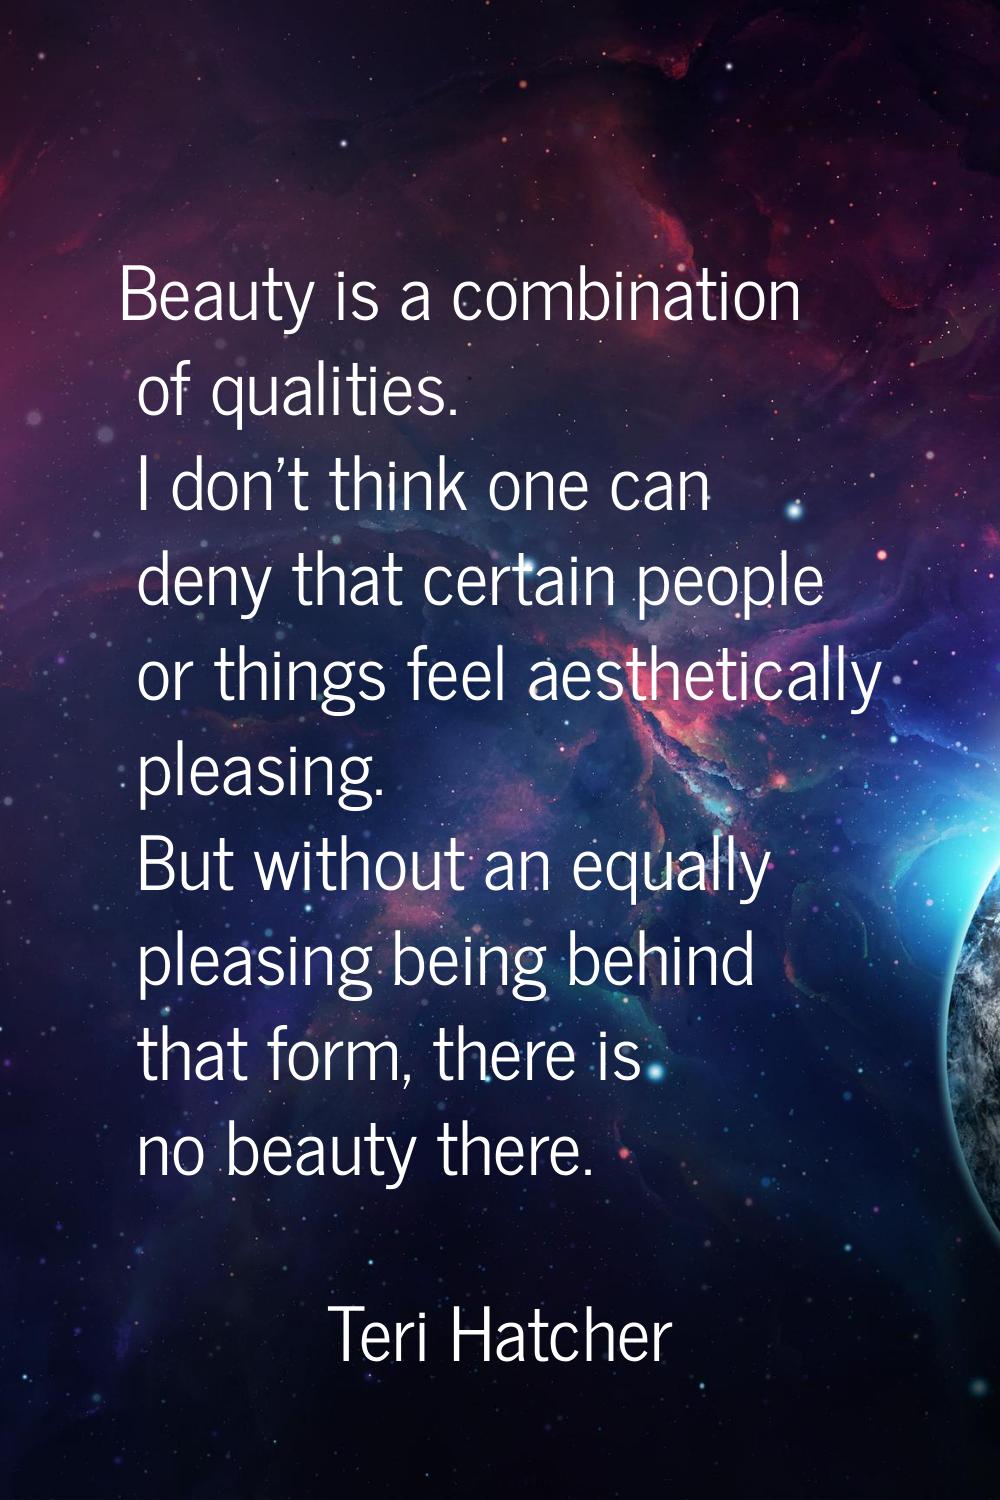 Beauty is a combination of qualities. I don't think one can deny that certain people or things feel